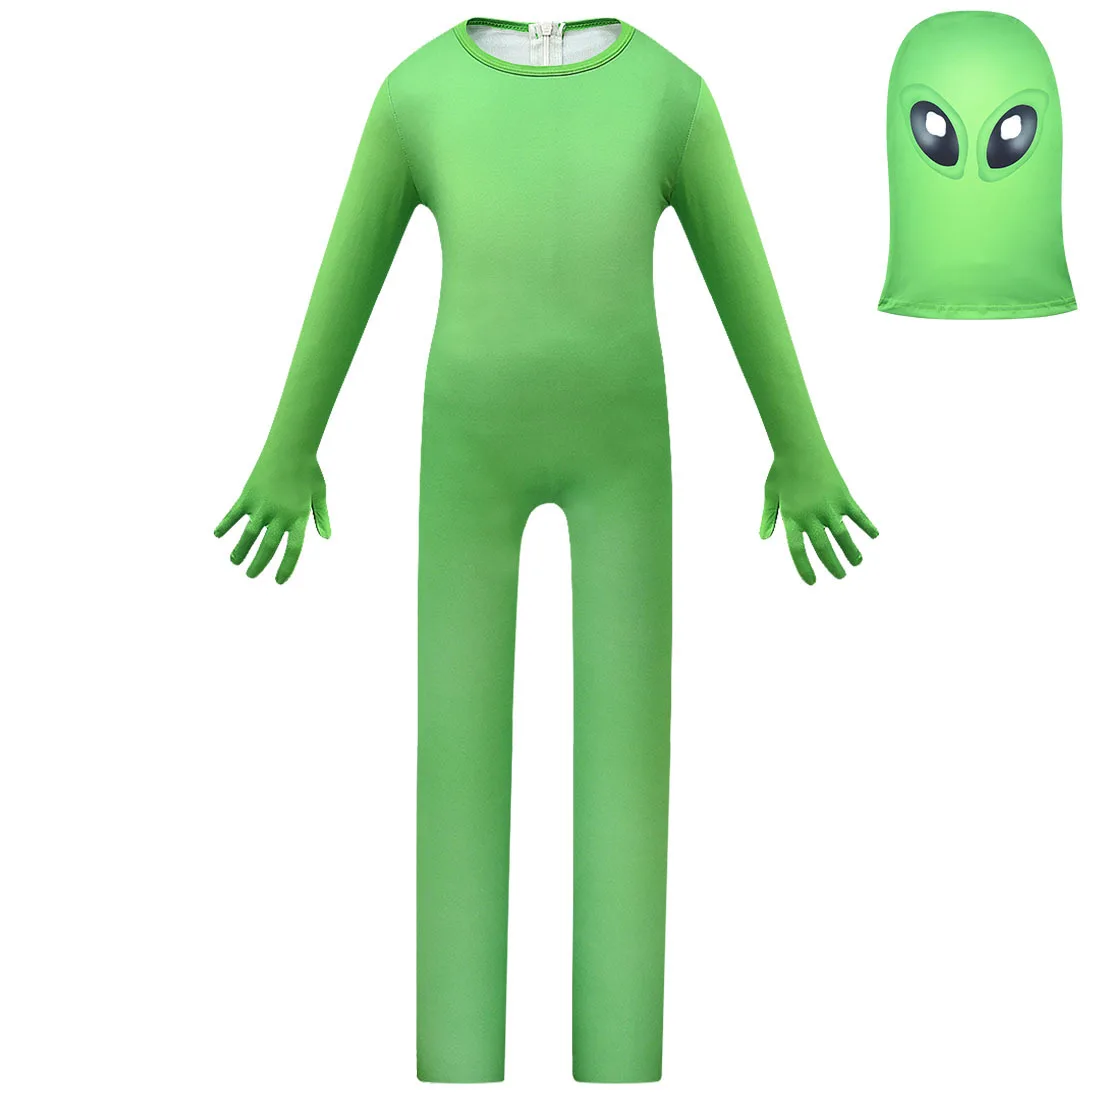 Cosplay Green Alien Costume For Kids Boys Fancy Halloween Carnival Party Stage Show Jumpsuit +Mask Children Clothes C48K171